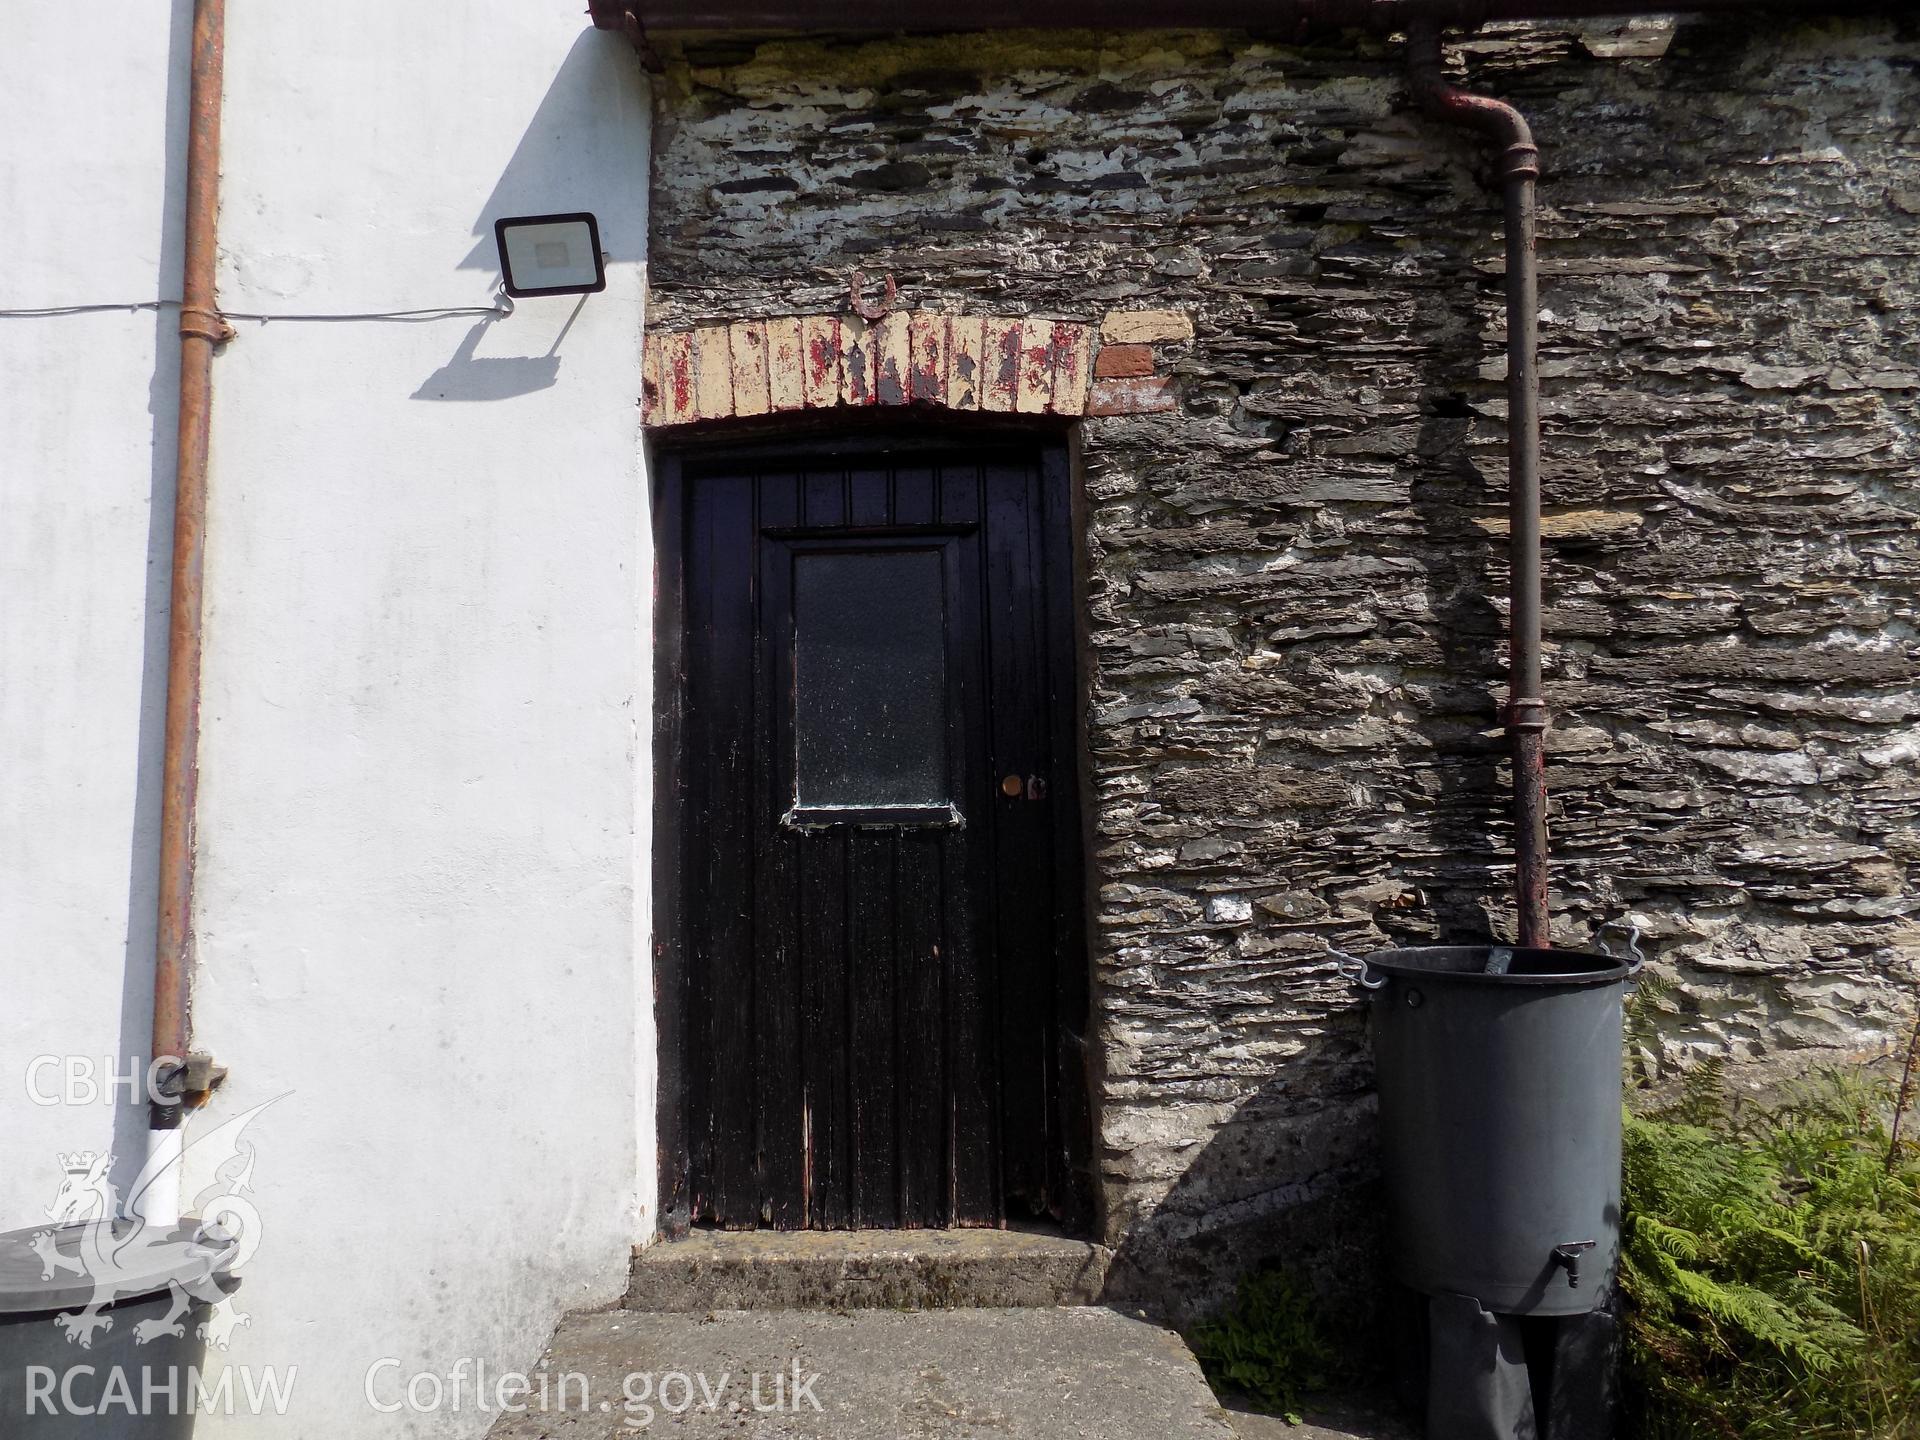 Digital colour photograph showing detailed view of rear entrance to Tywyll Nodwydd, Pennal, dated 2019. Photographed by Mr Gary Coulsby to meet a condition attached to a planning application.